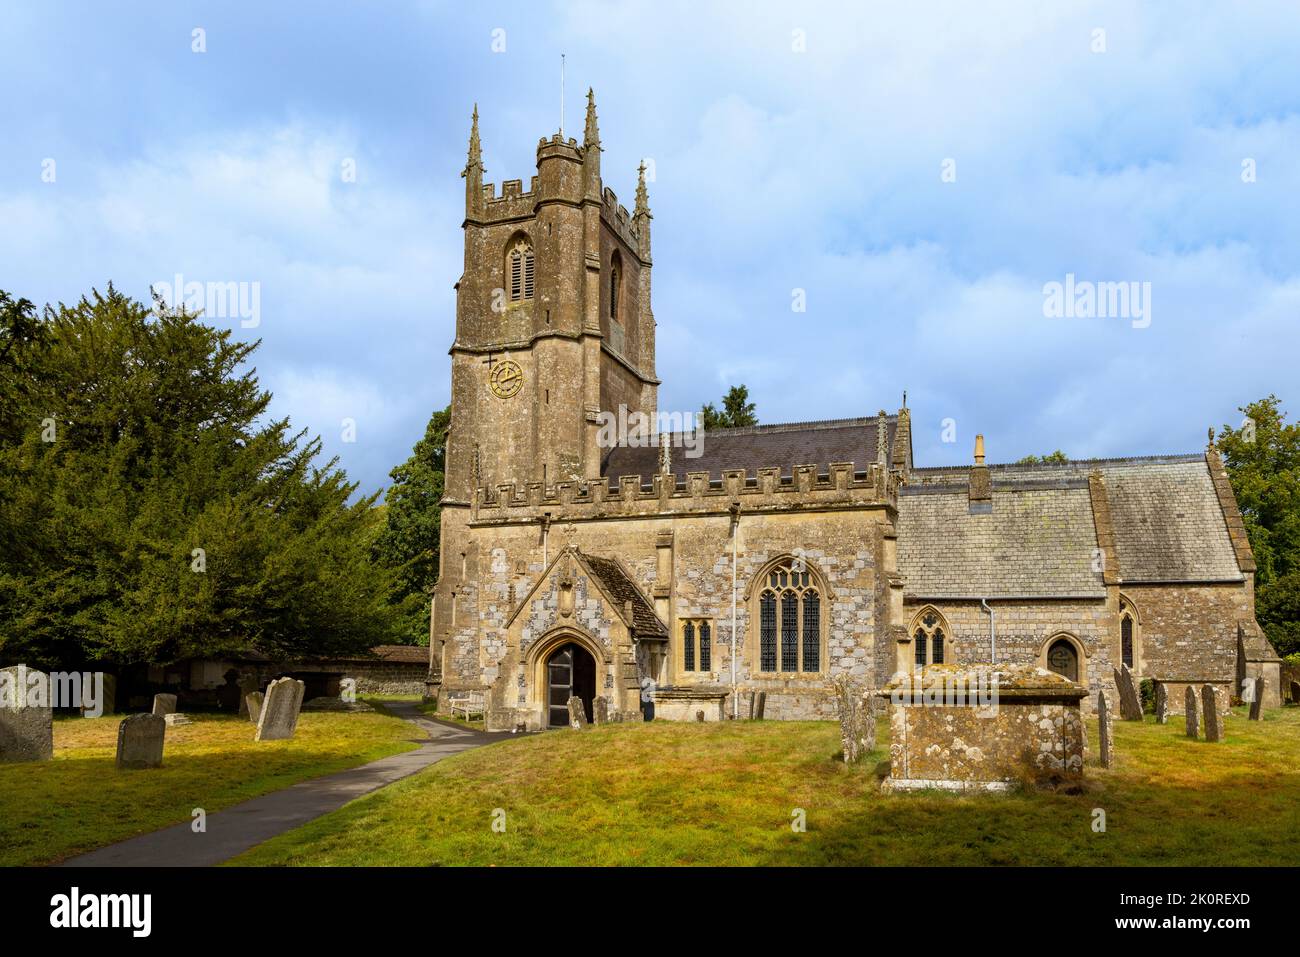 The Anglo-Saxon Church of St James, a Grade I listed building, Avebury, Wiltshire, England, United Kingdom. Stock Photo